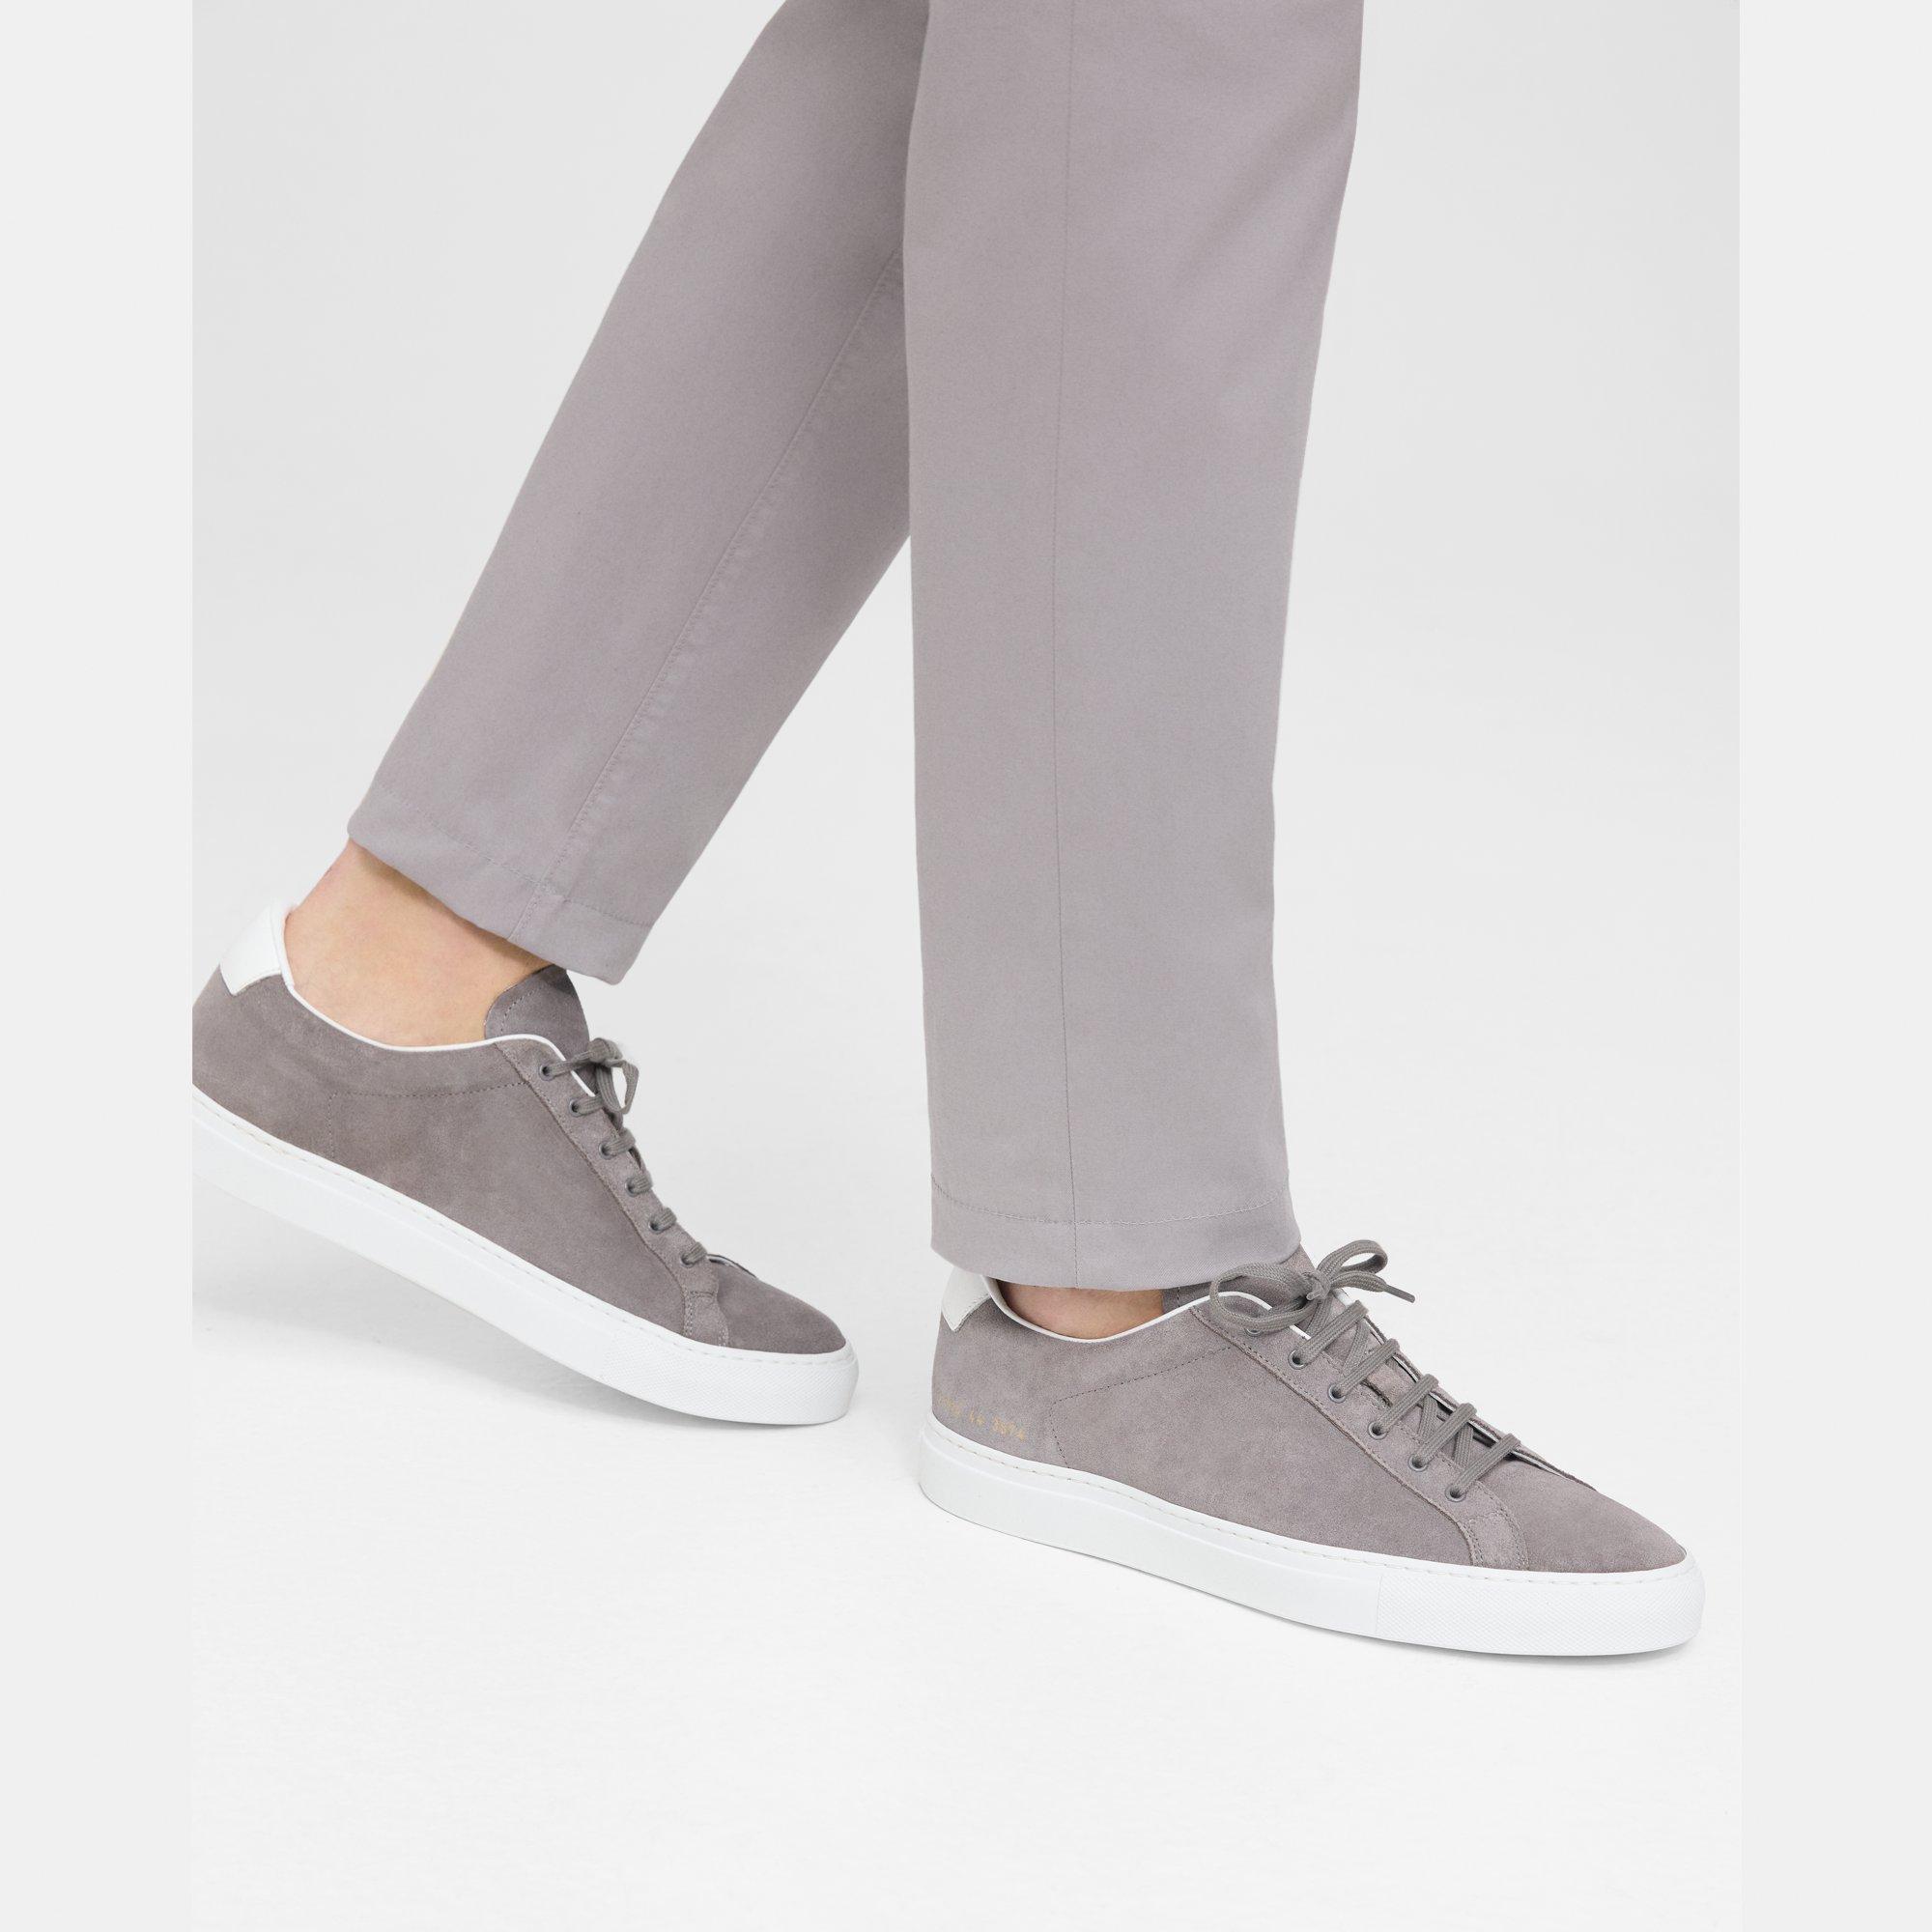 Theory Common Projects Men's Retro Low-Top Sneakers